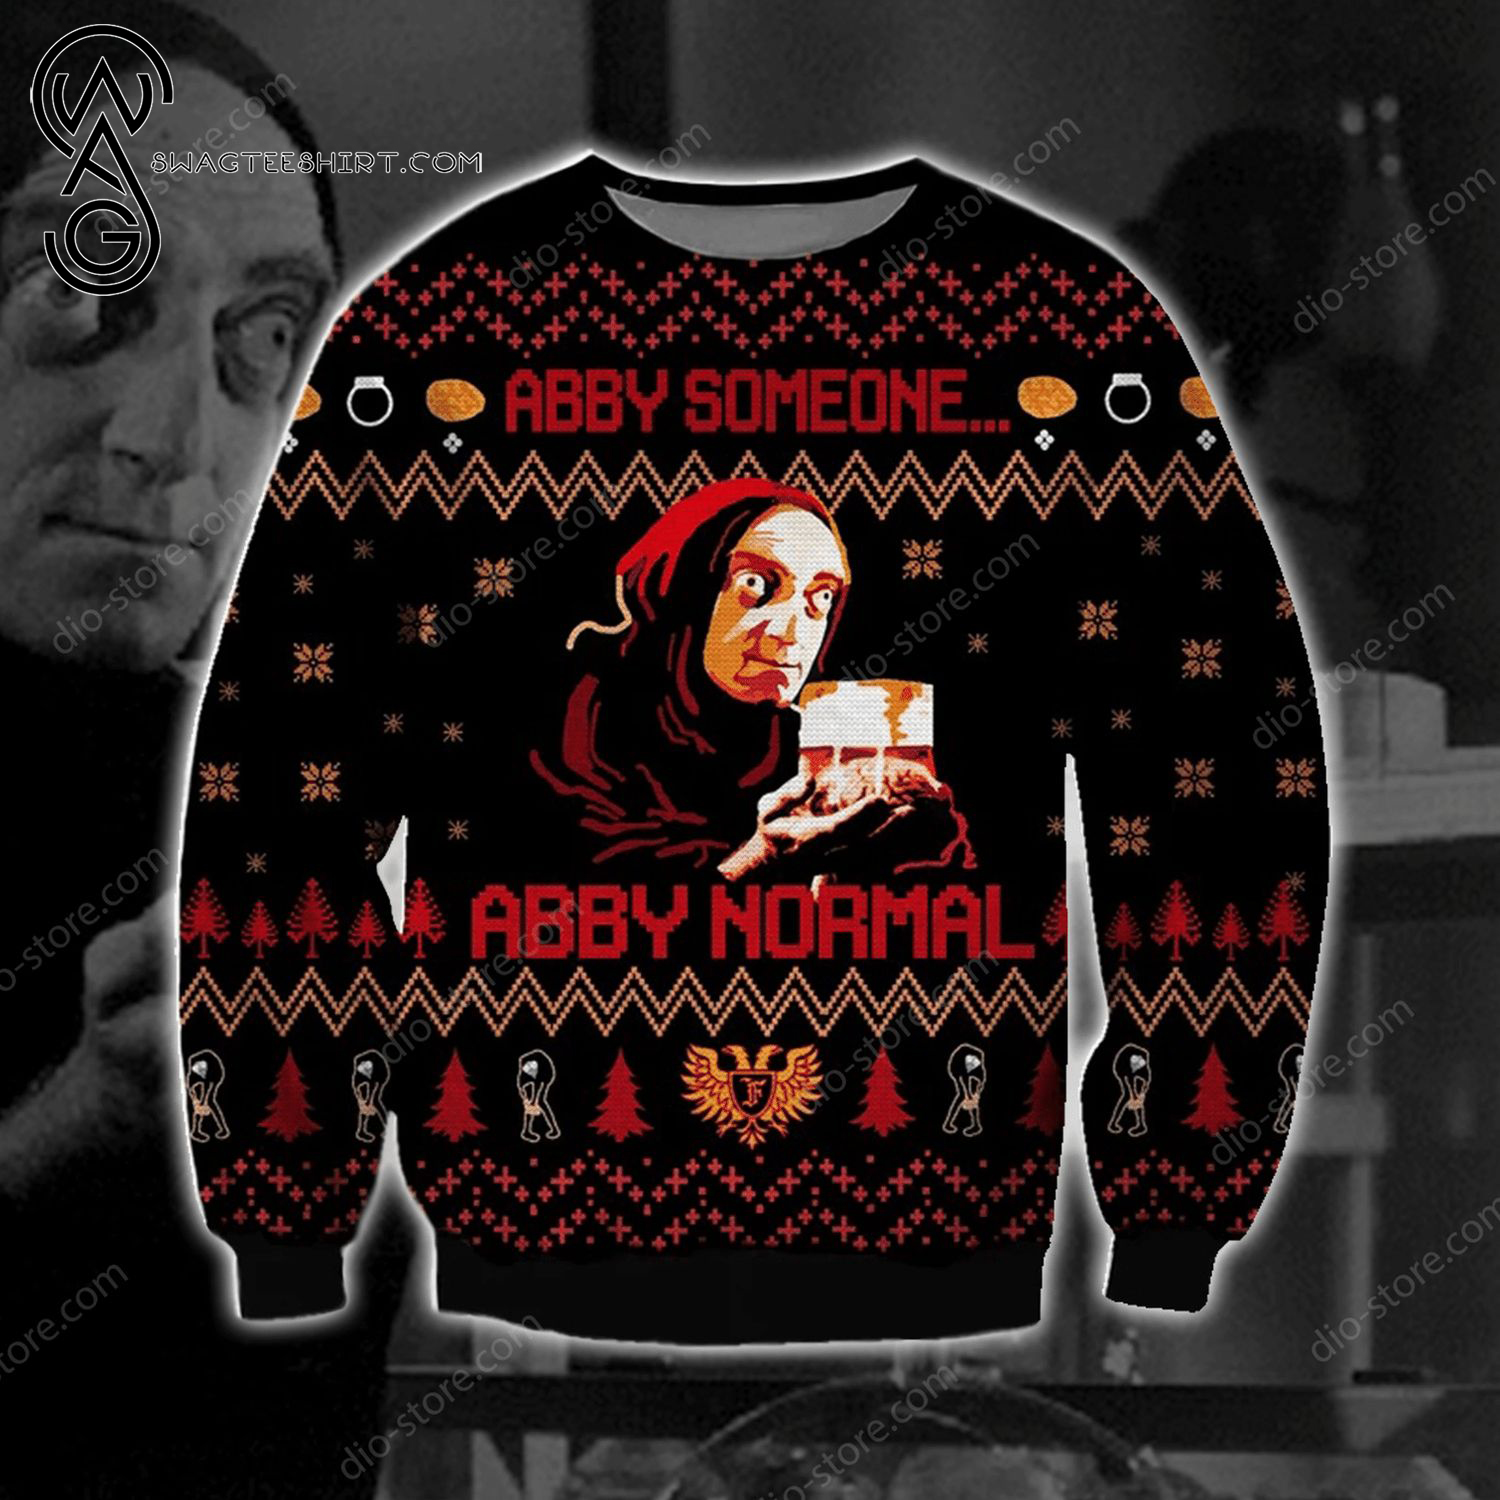 Abby Someone Abby Normal Full Print Ugly Christmas Sweater